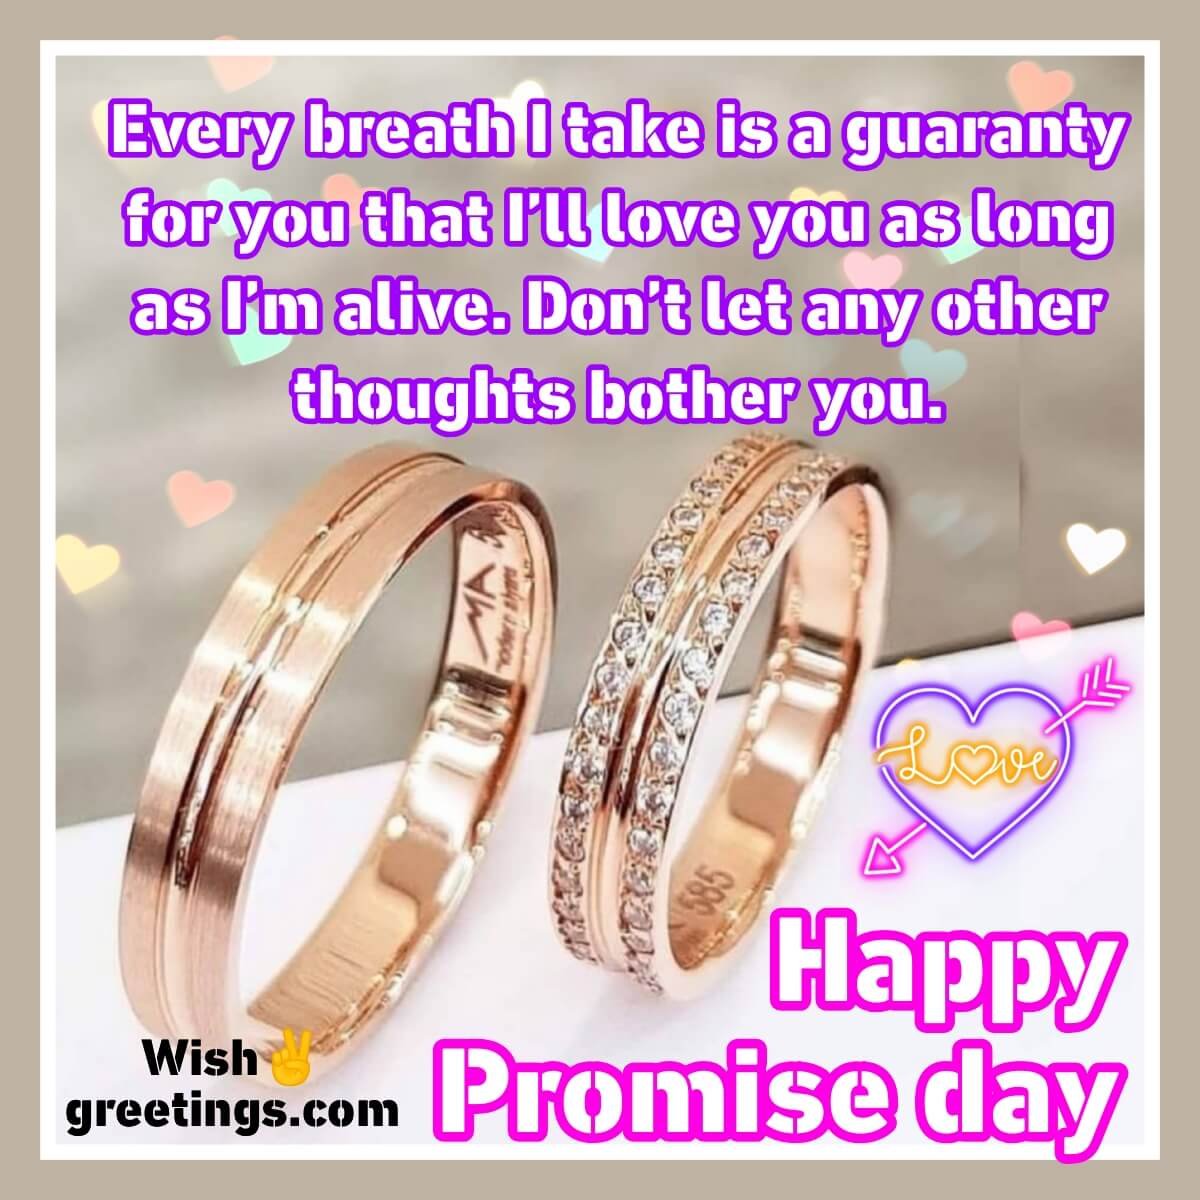 Happy Promise Day Wishes